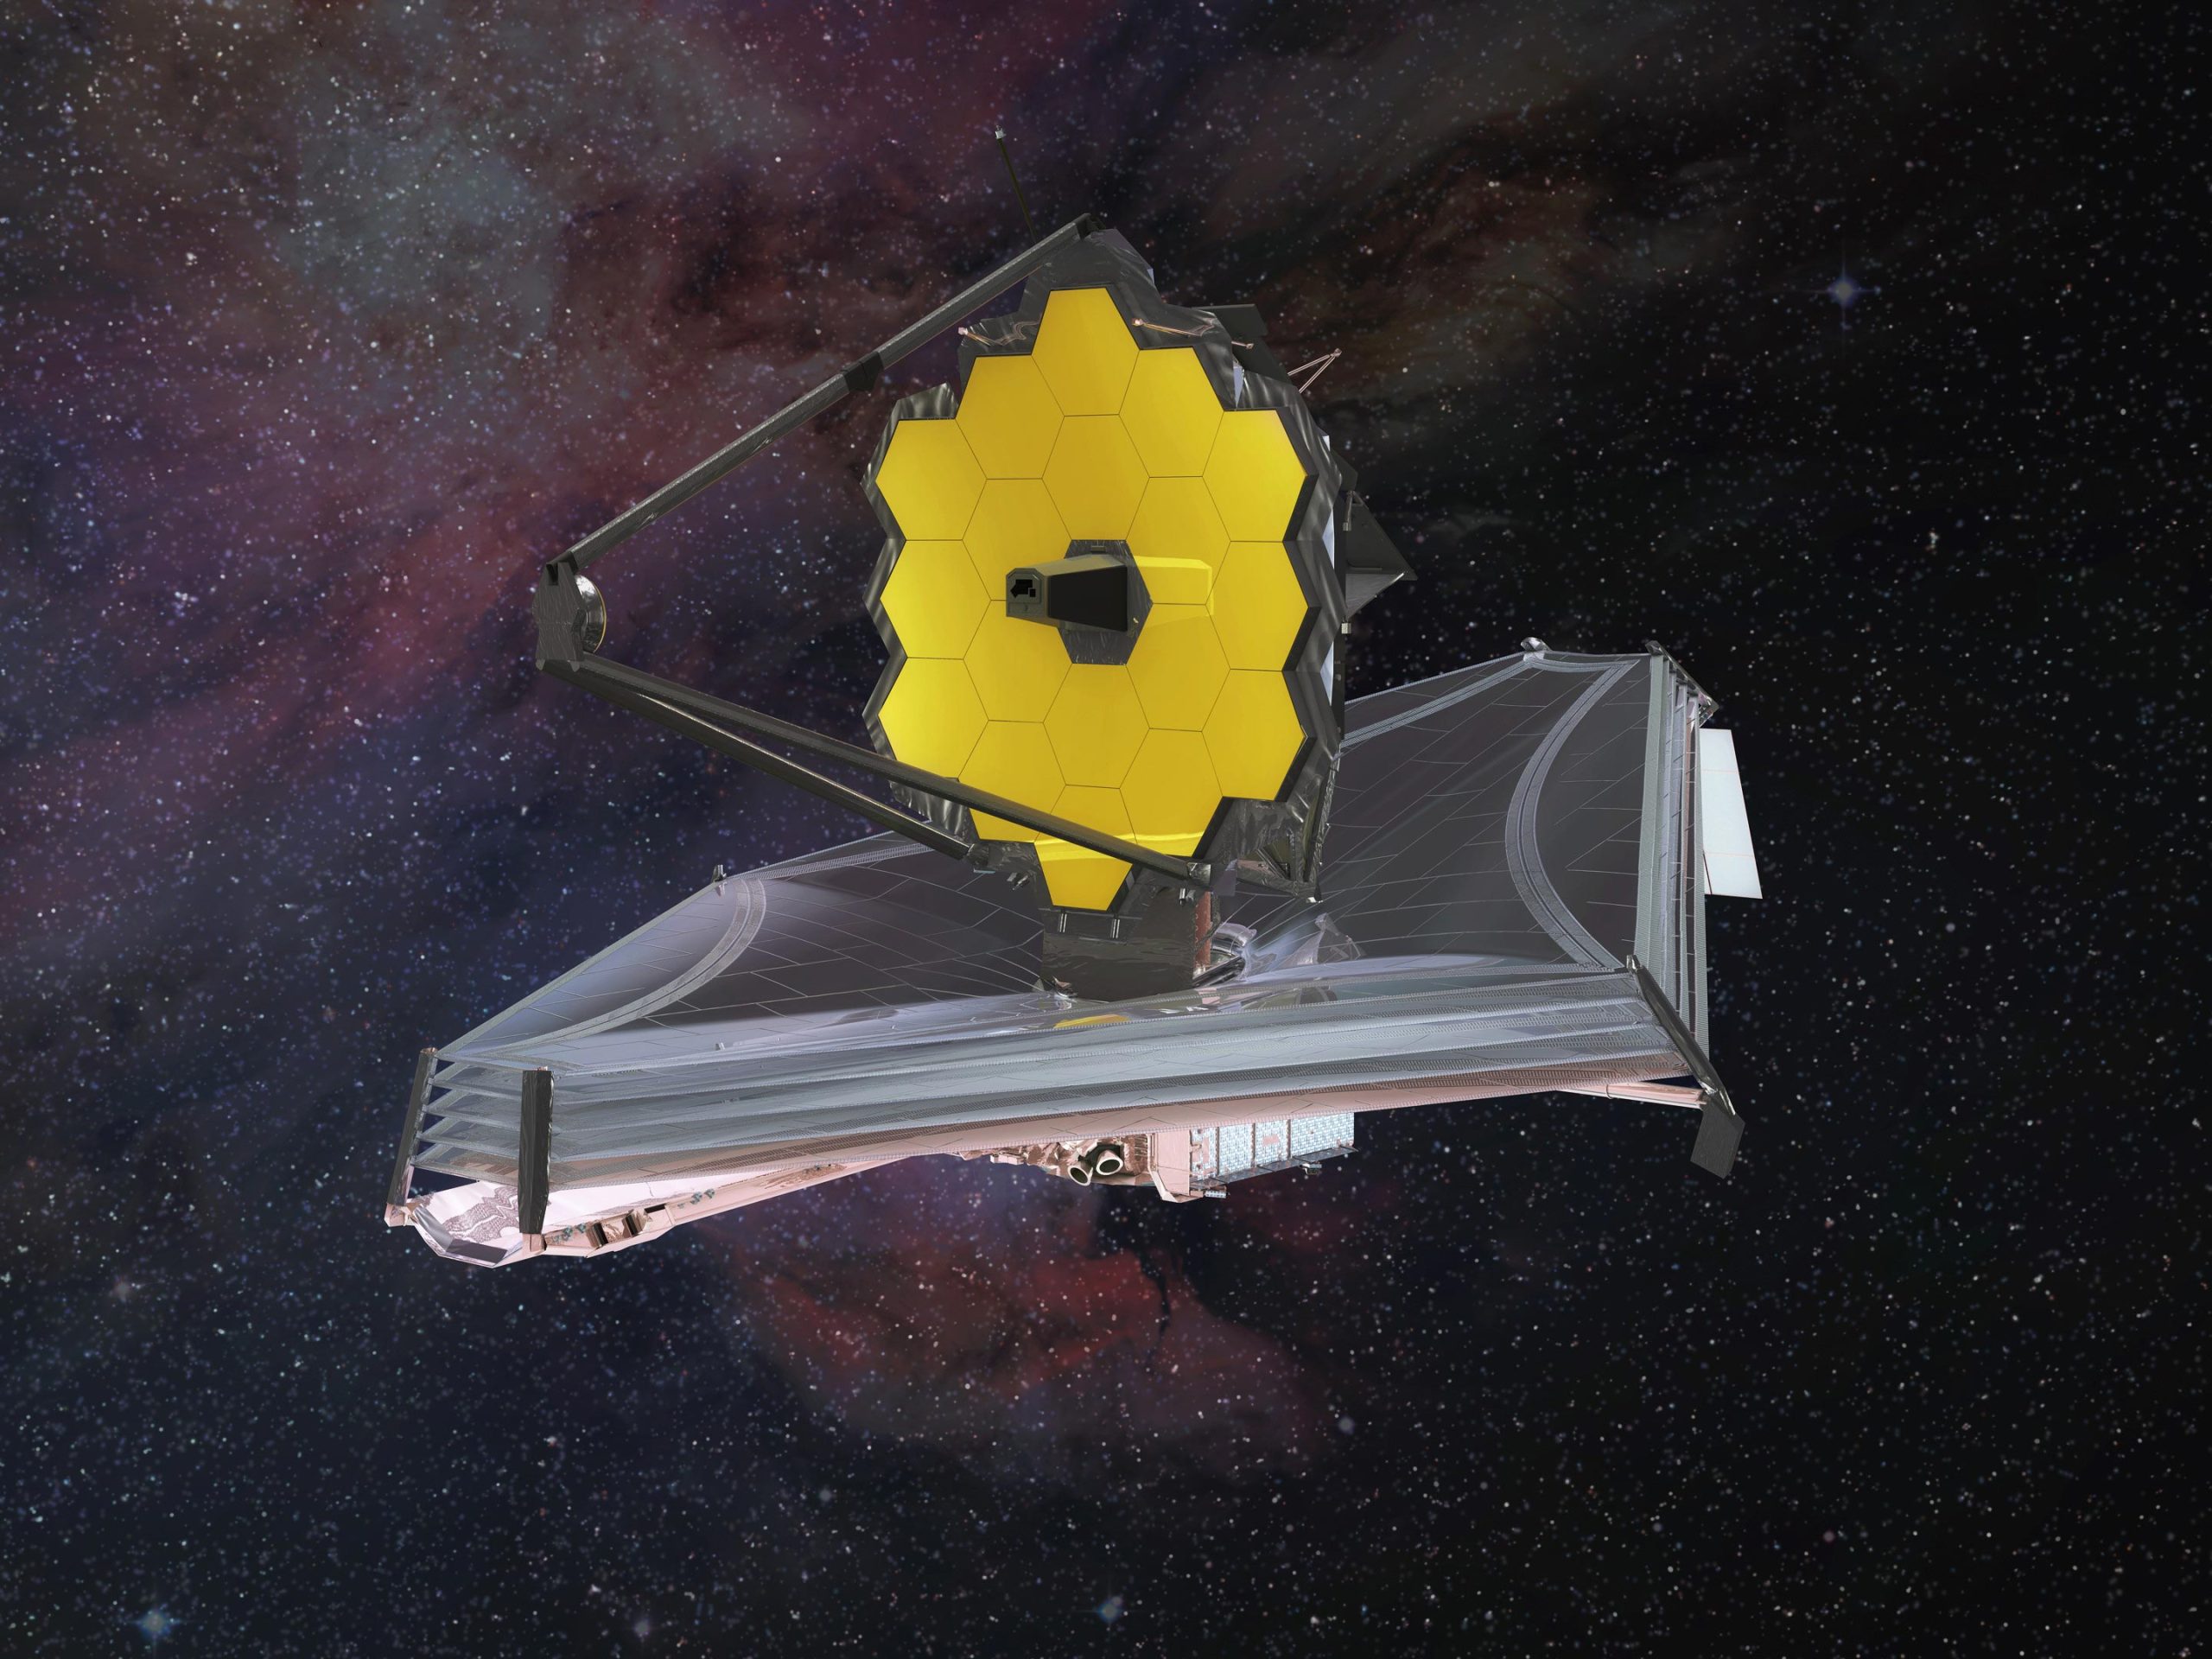 Webb Space Telescope Glitch Likely Caused by Galactic Cosmic Ray – NIRISS Returns to Full Operations